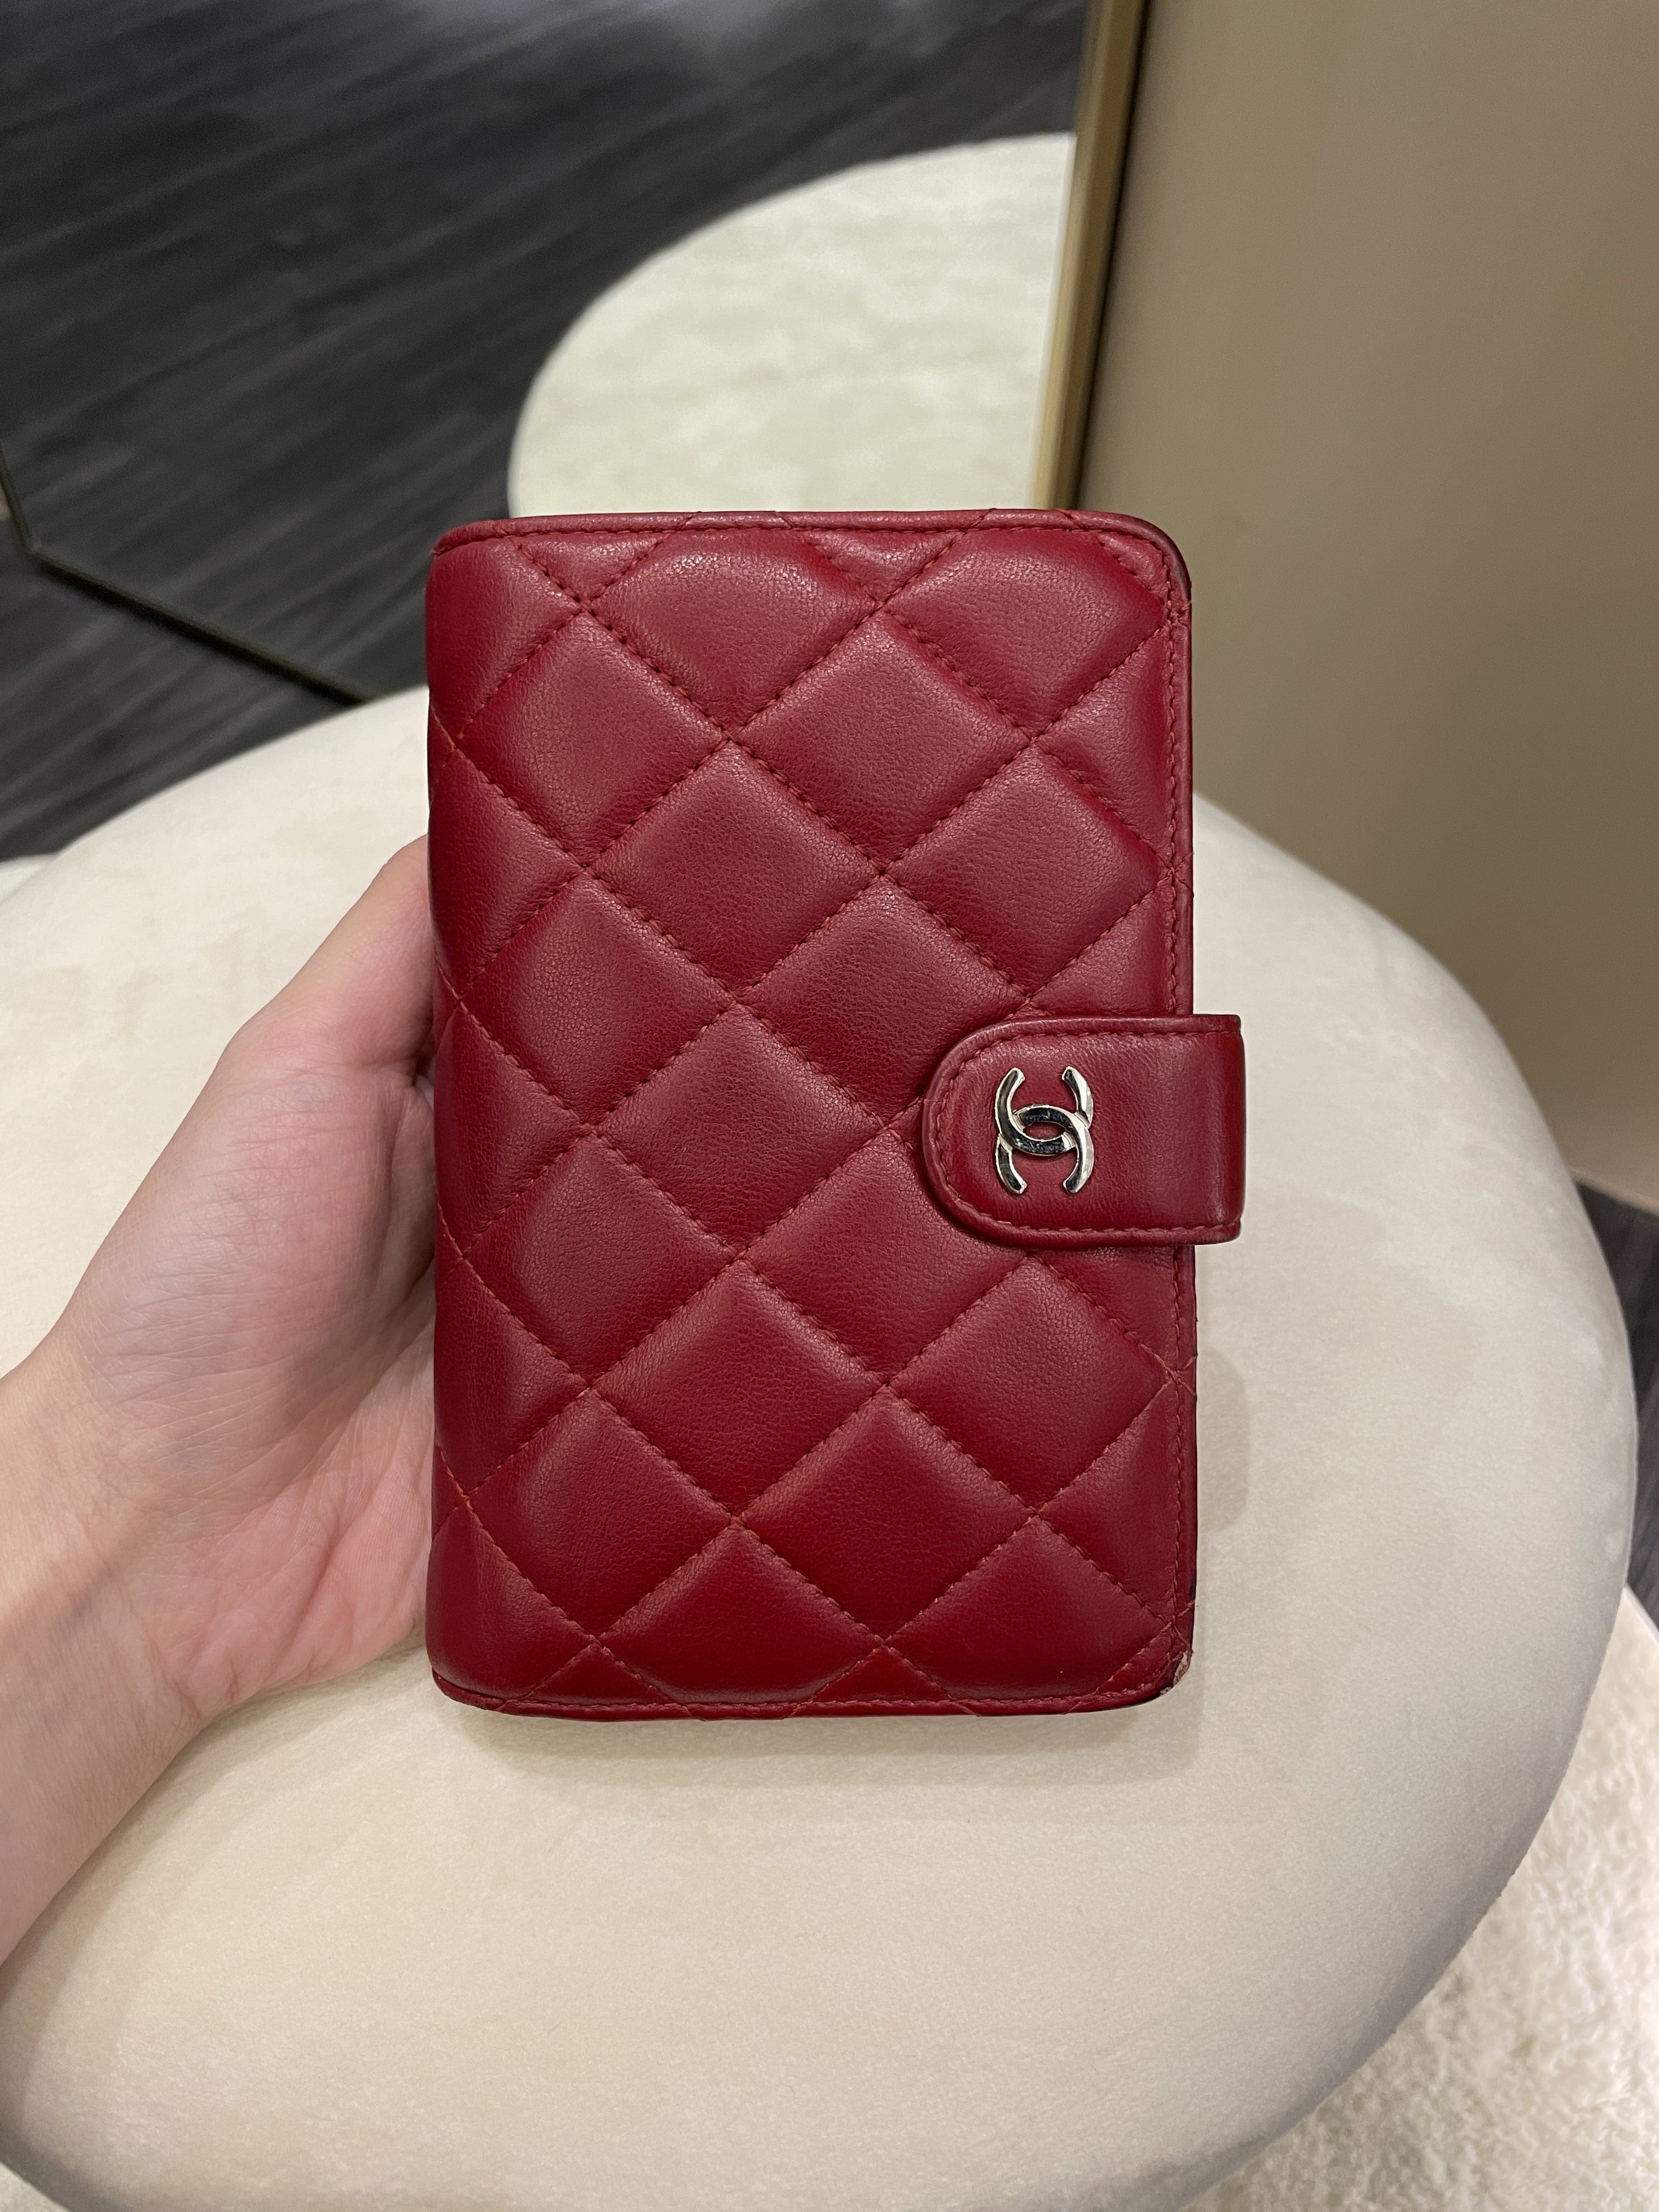 chanel wallet red